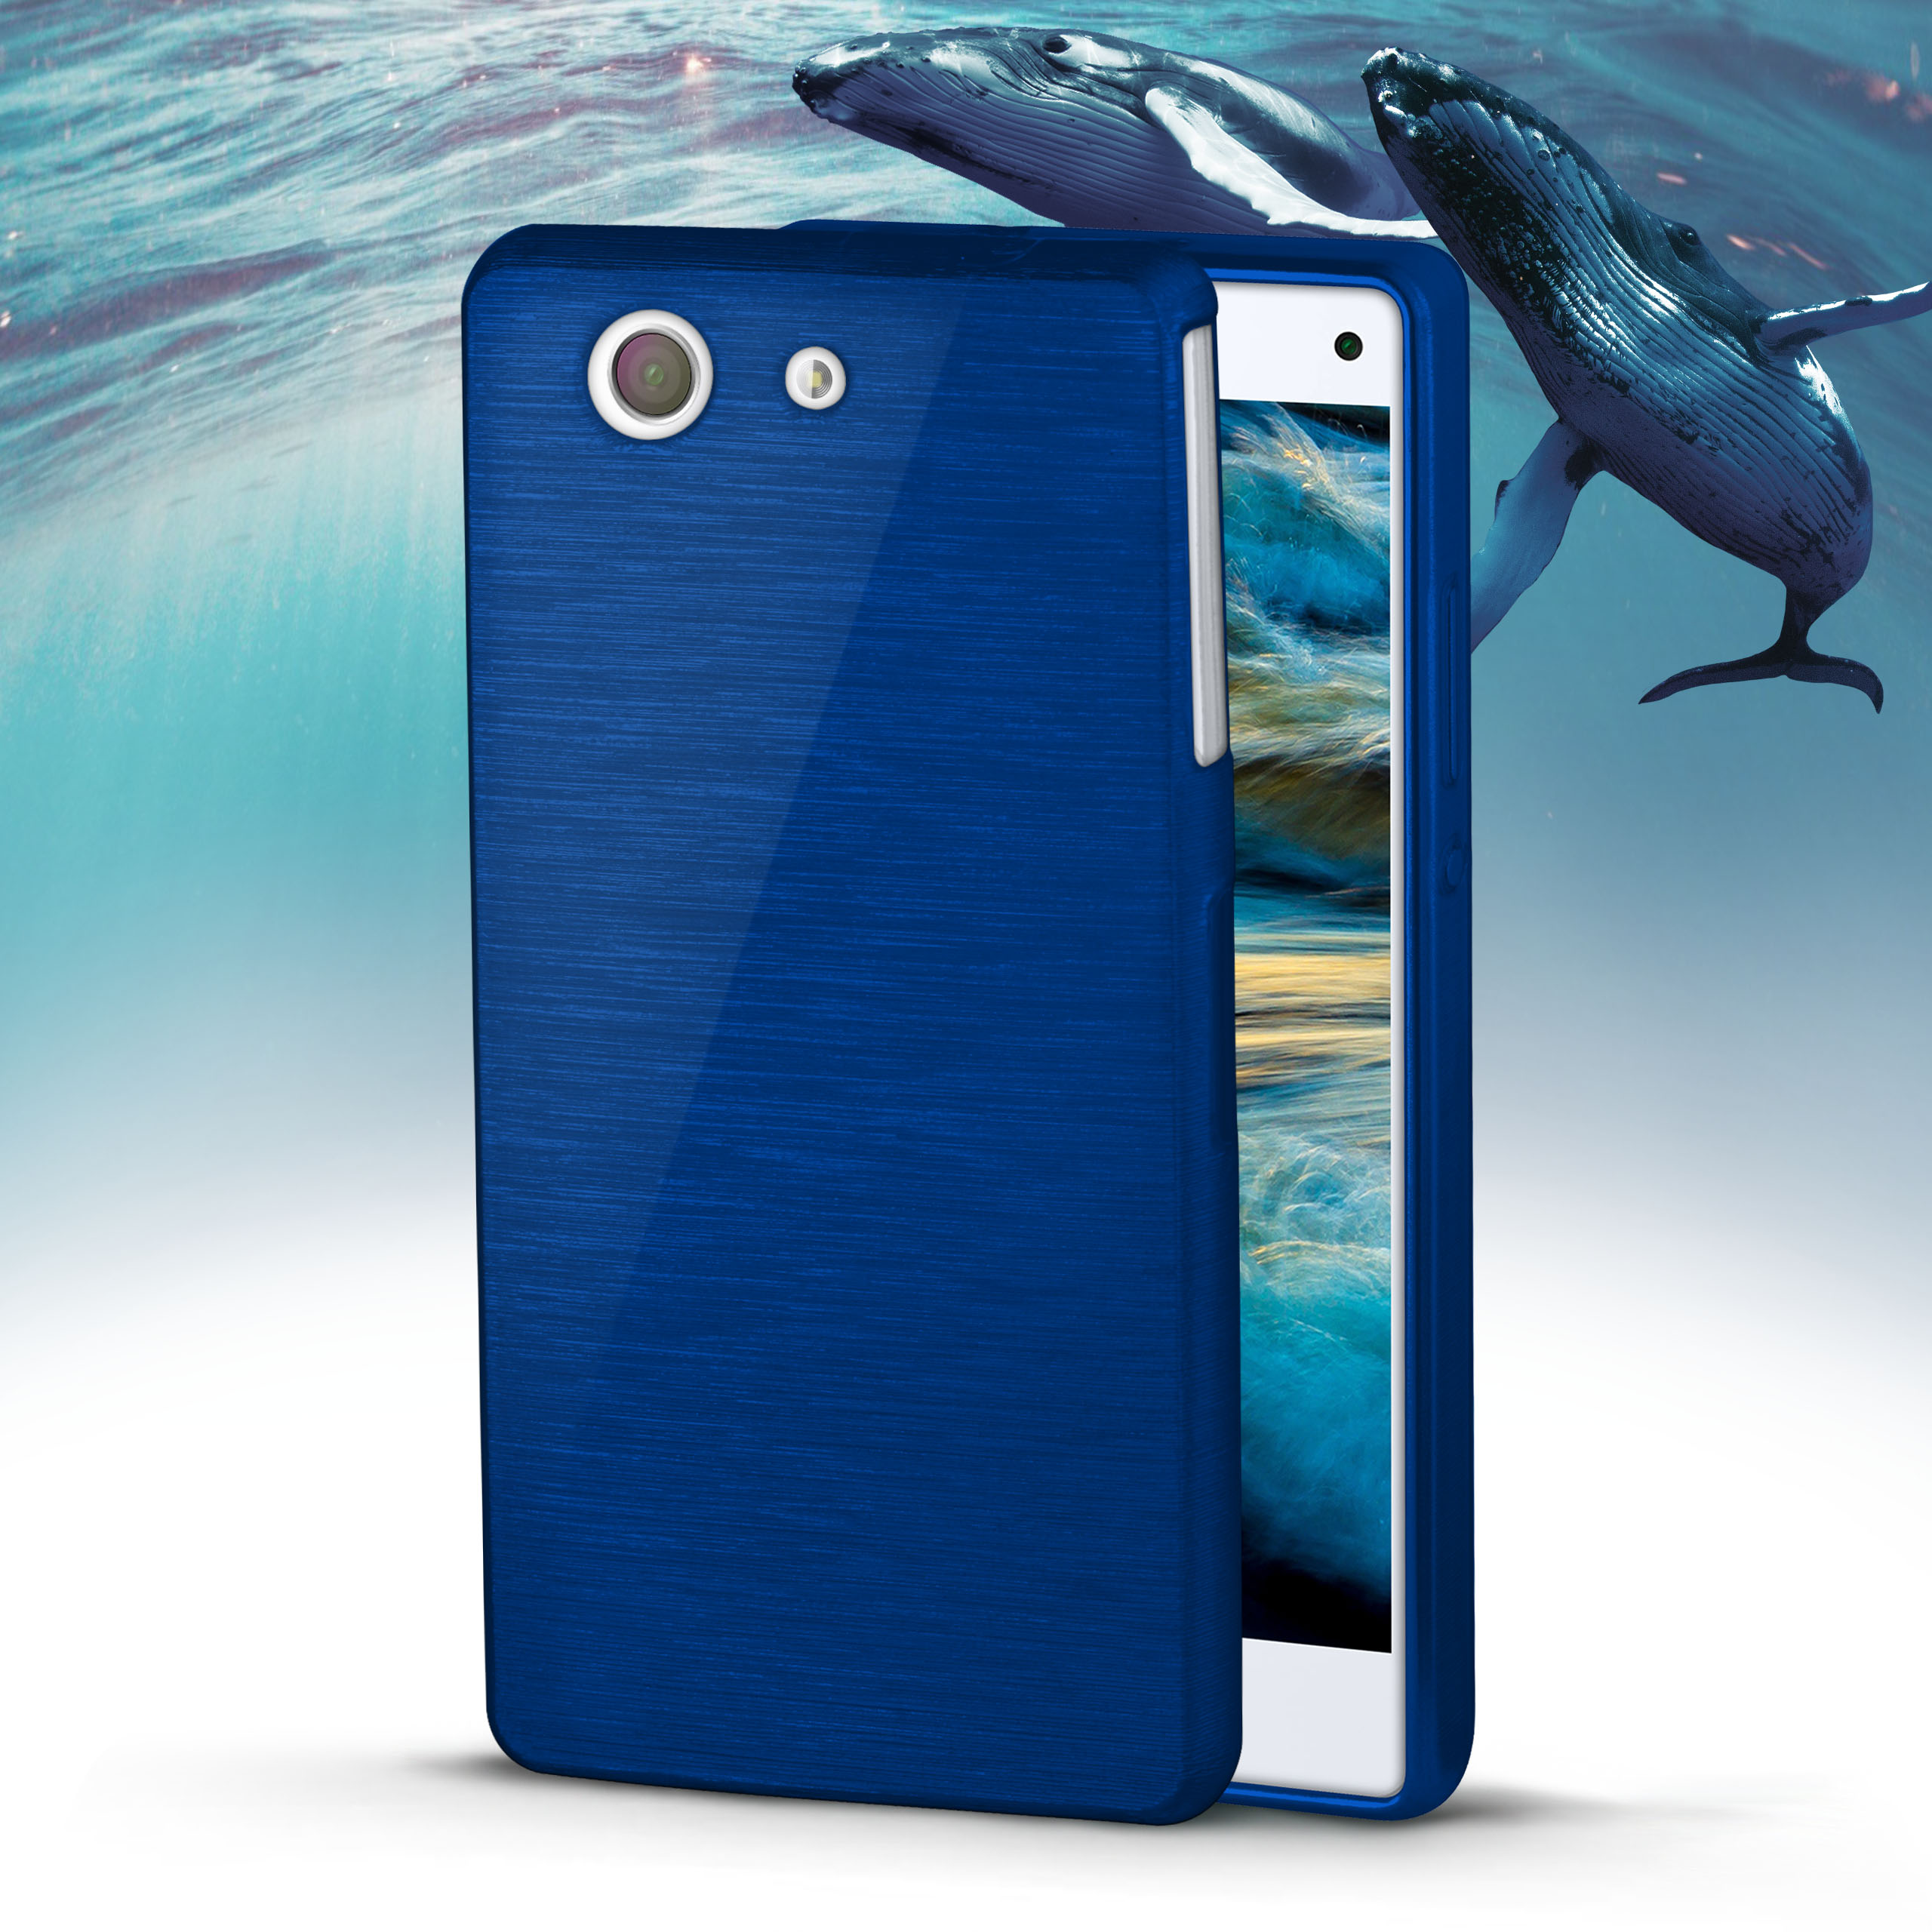 MOEX Brushed Case, Backcover, Sony, Navy-Blue Xperia Z3 Compact